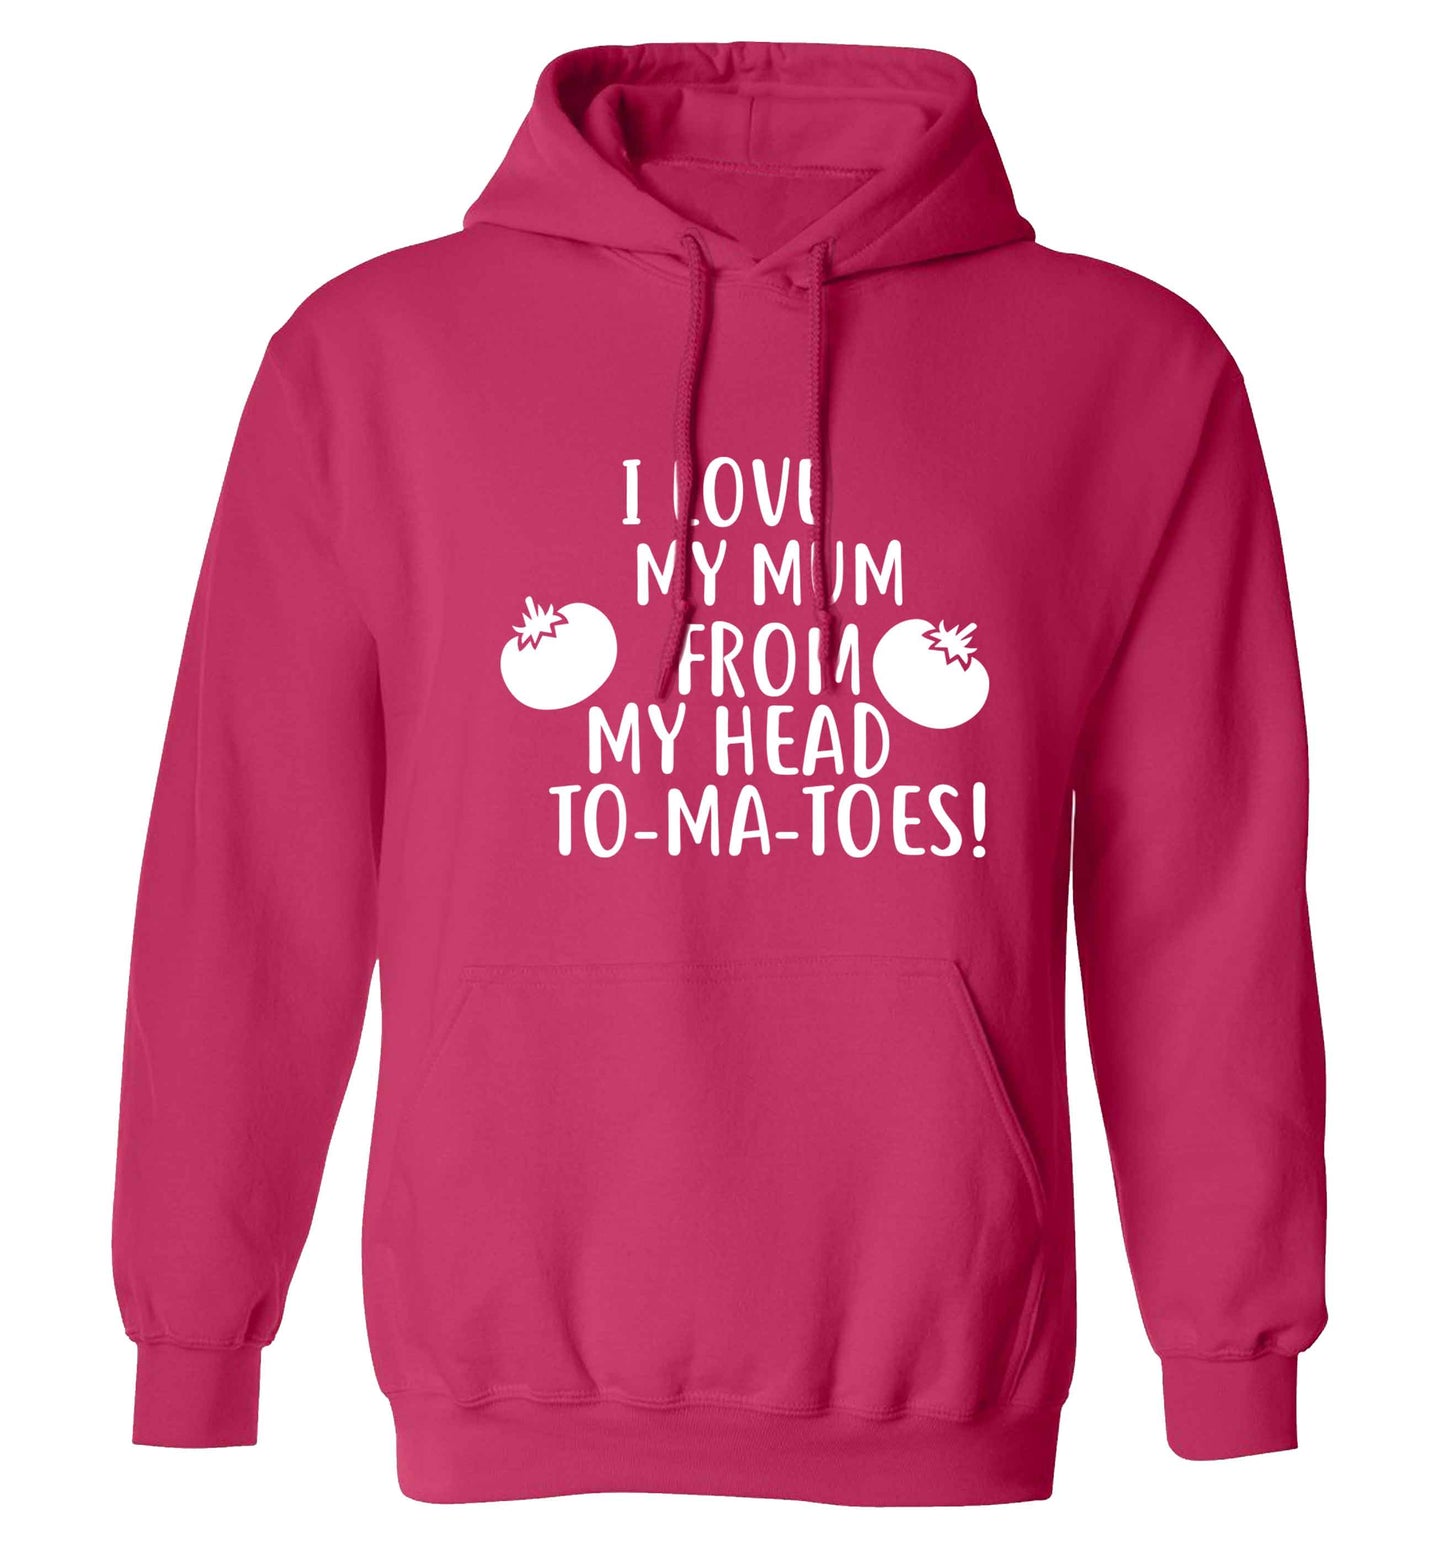 I love my mum from my head to-my-toes! adults unisex pink hoodie 2XL